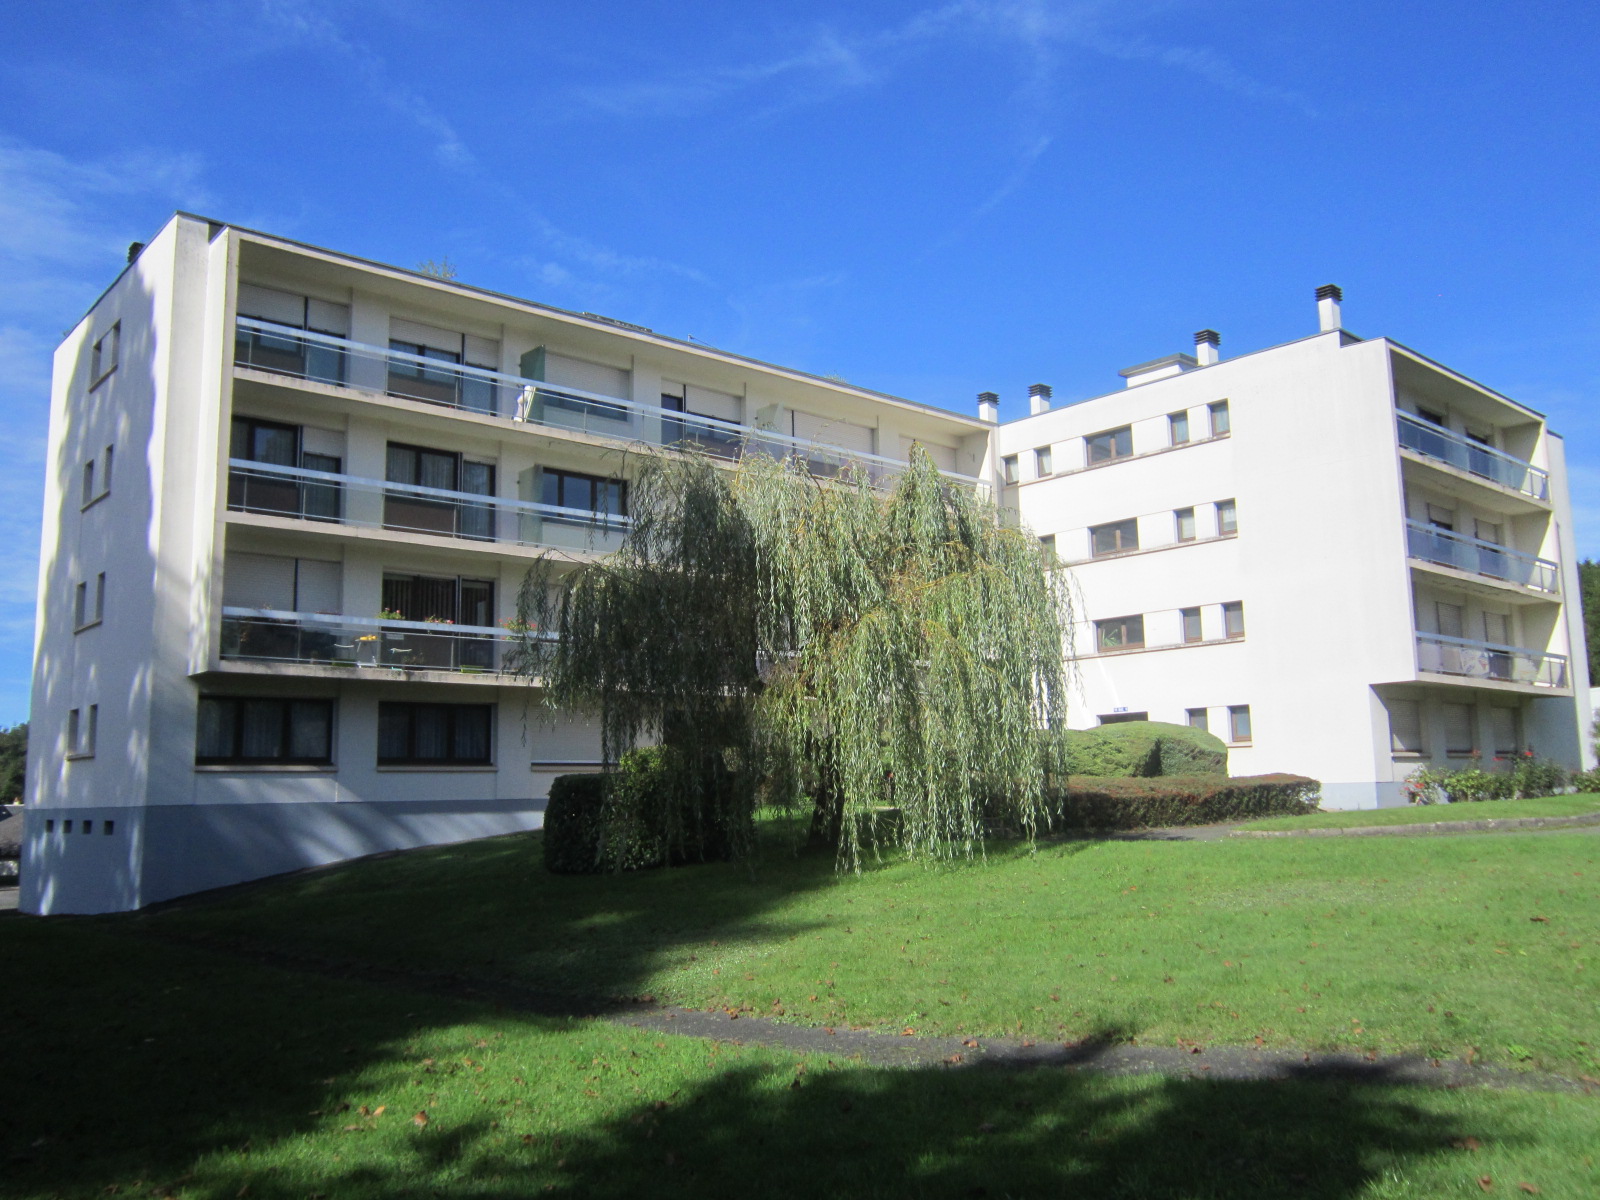 LM Immobilier